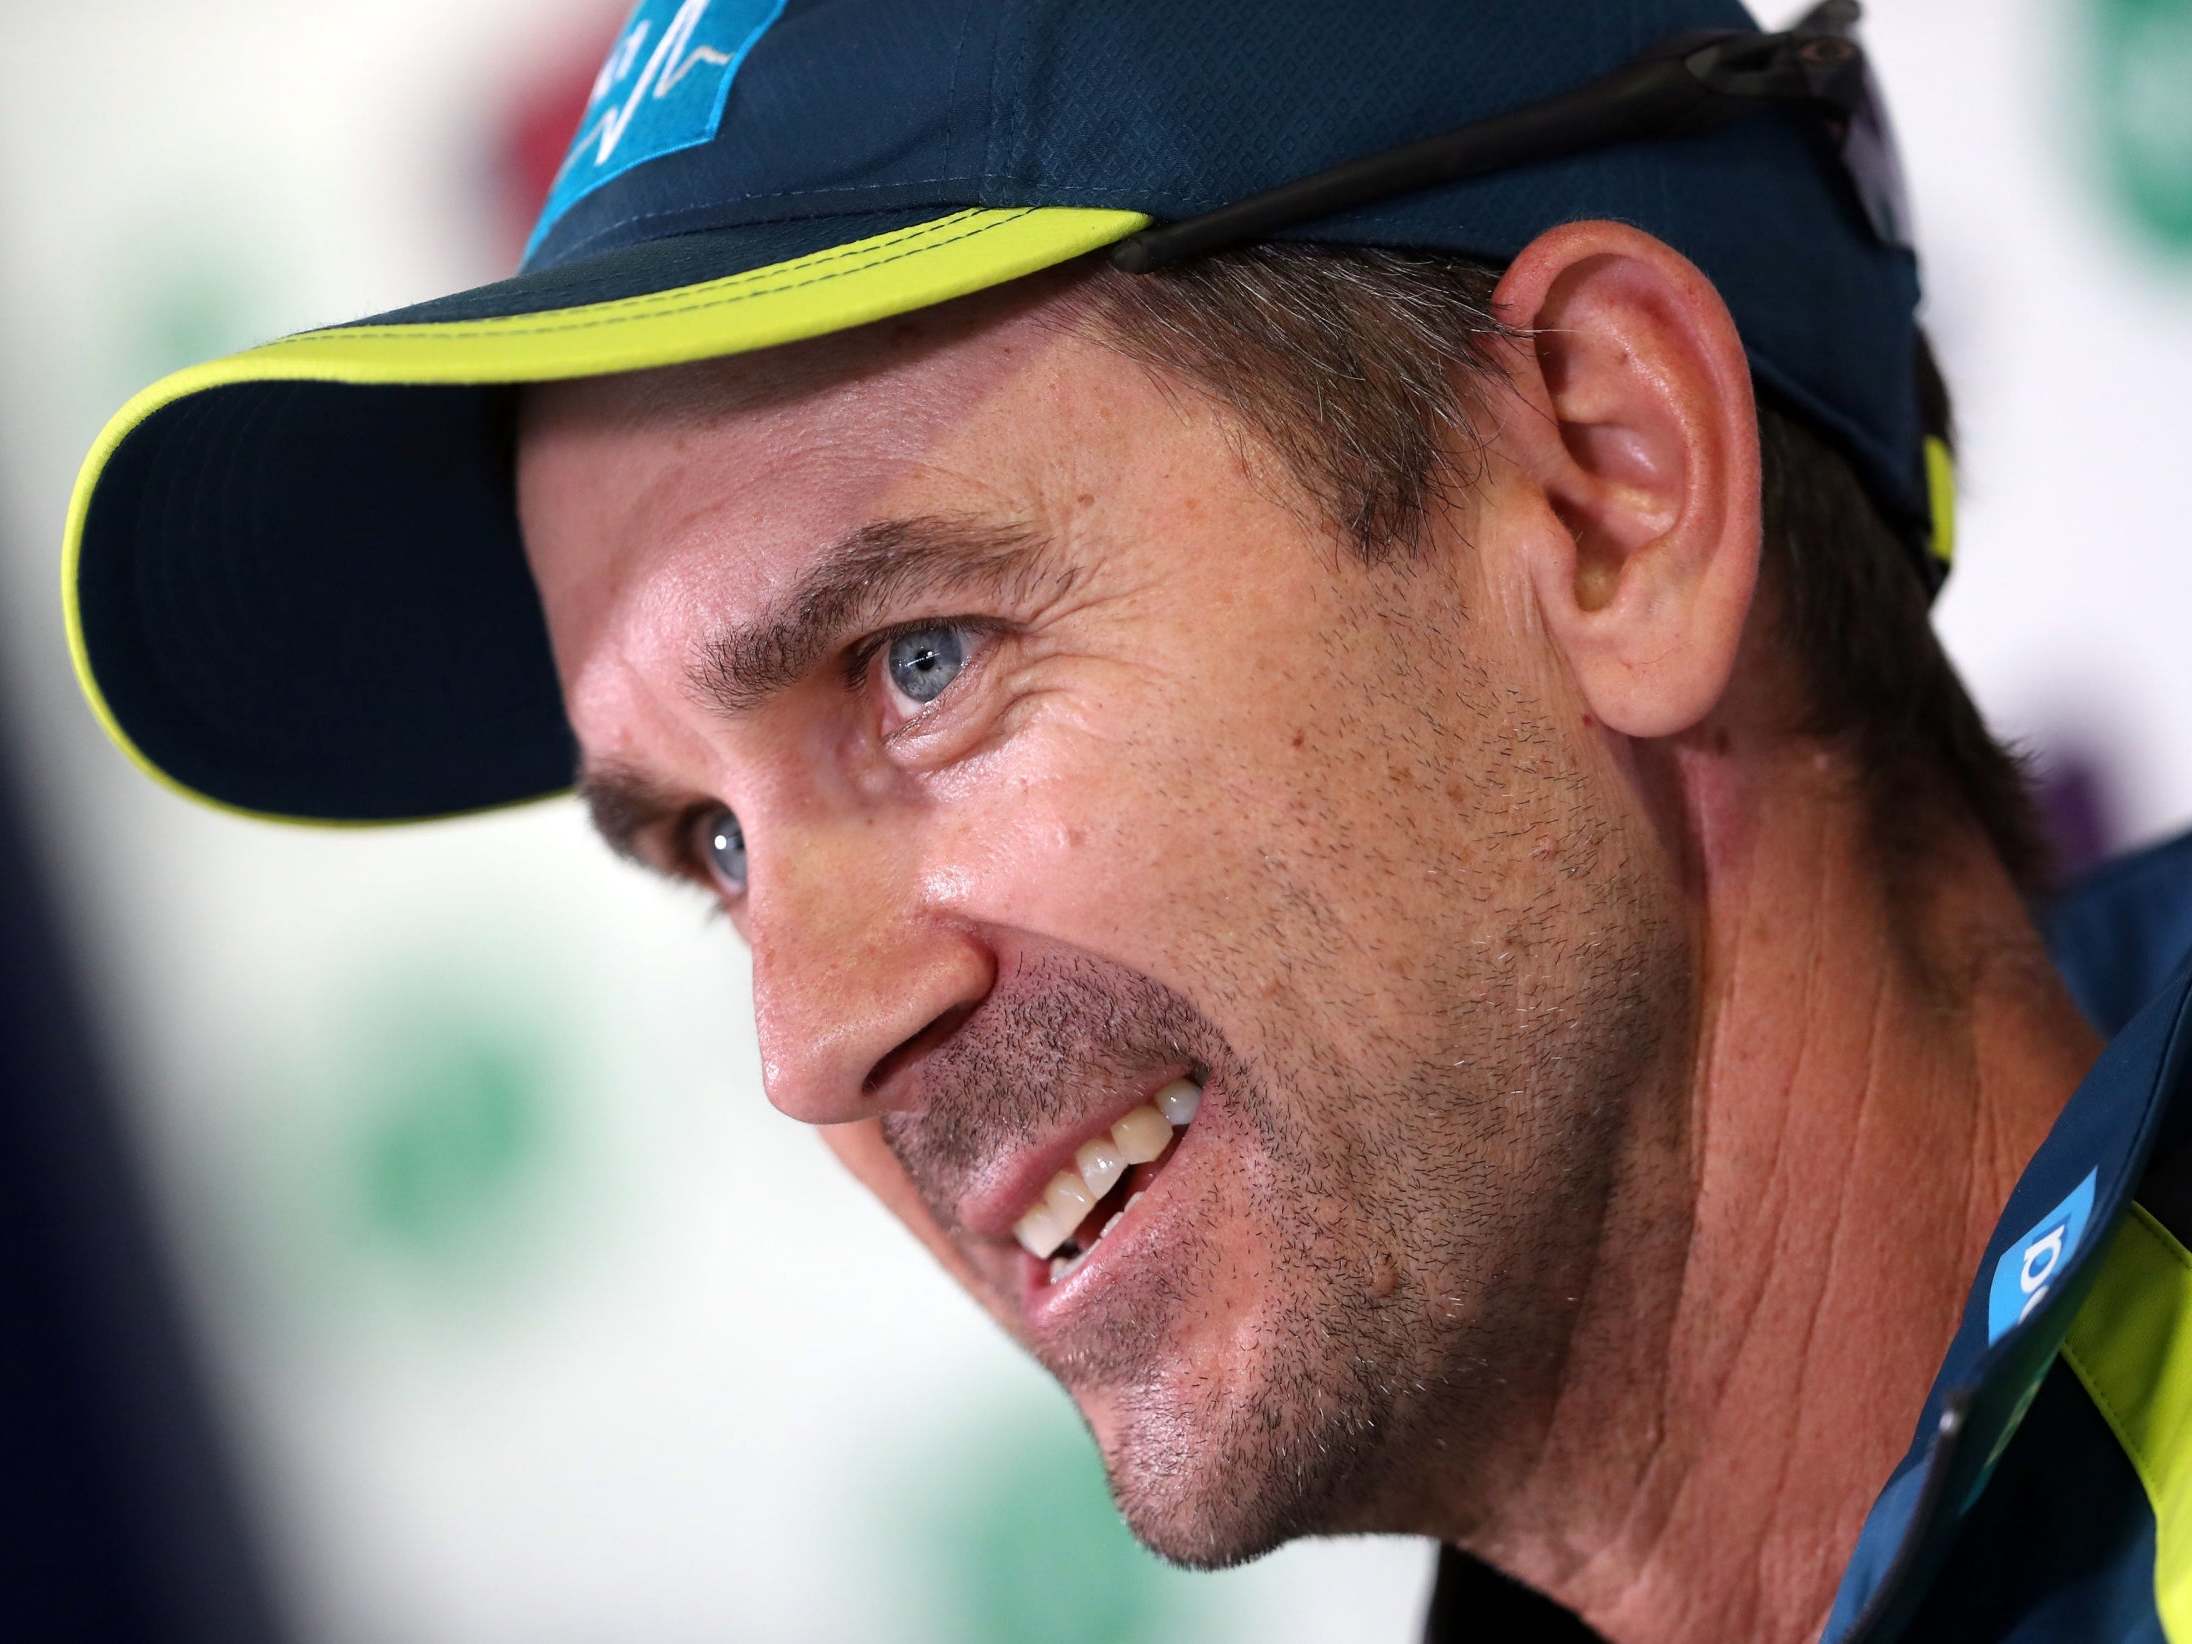 The Ashes 2019: Justin Langer's smarter-not-harder approach key as Australia bid to keep England guessing